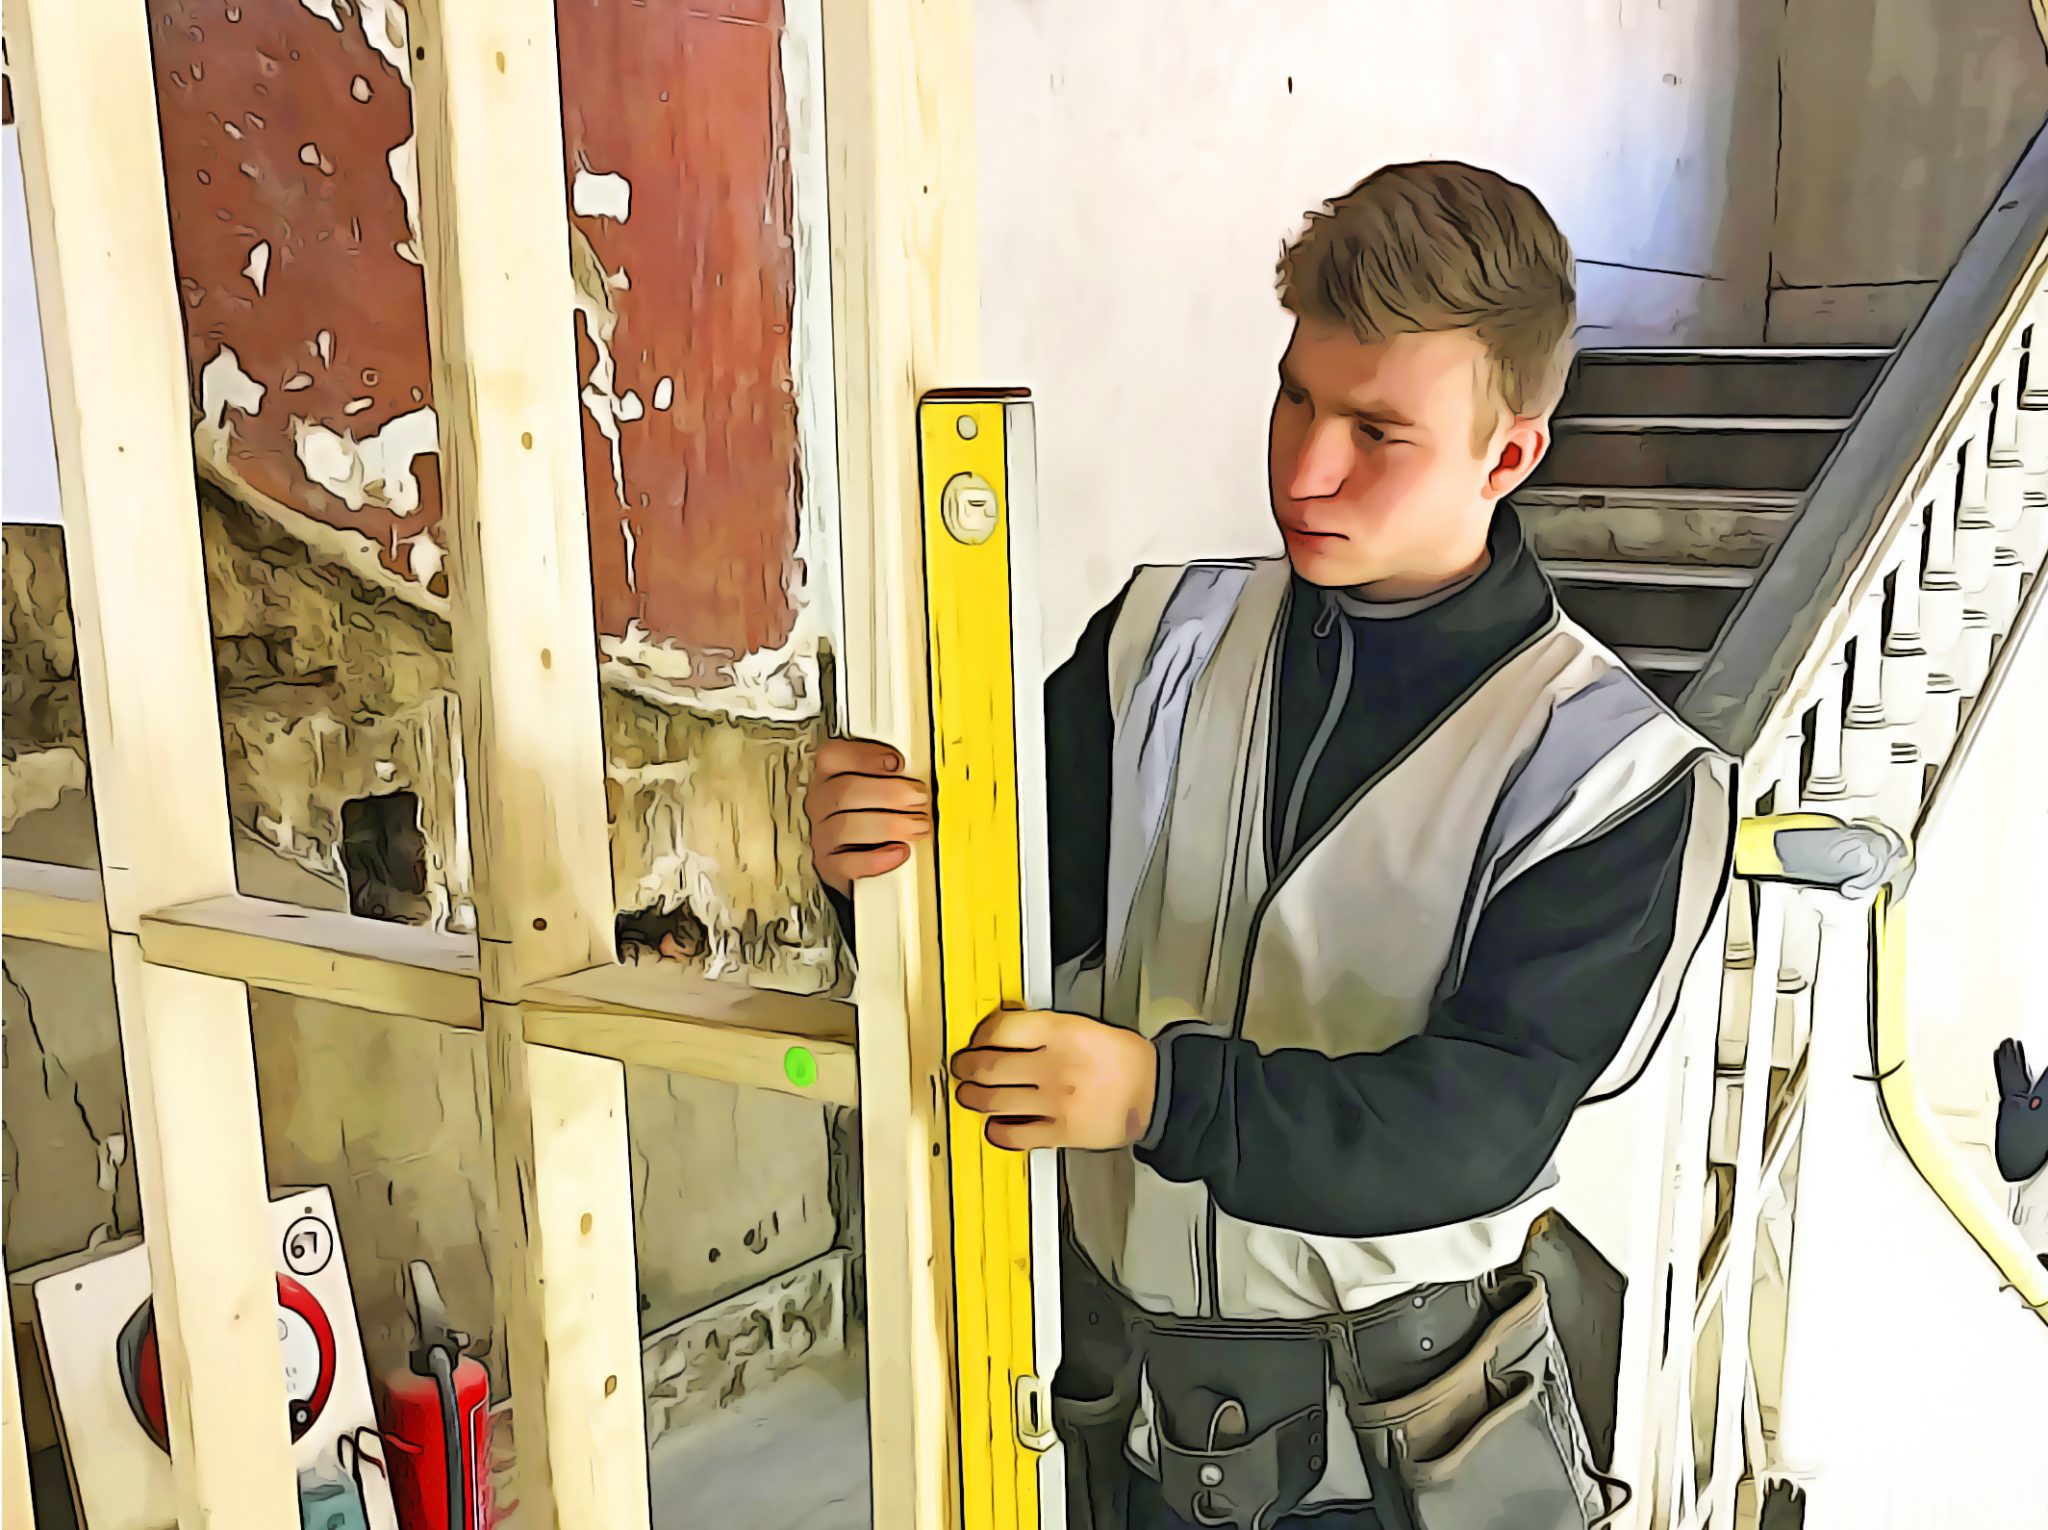 A day in the life of a construction apprentice